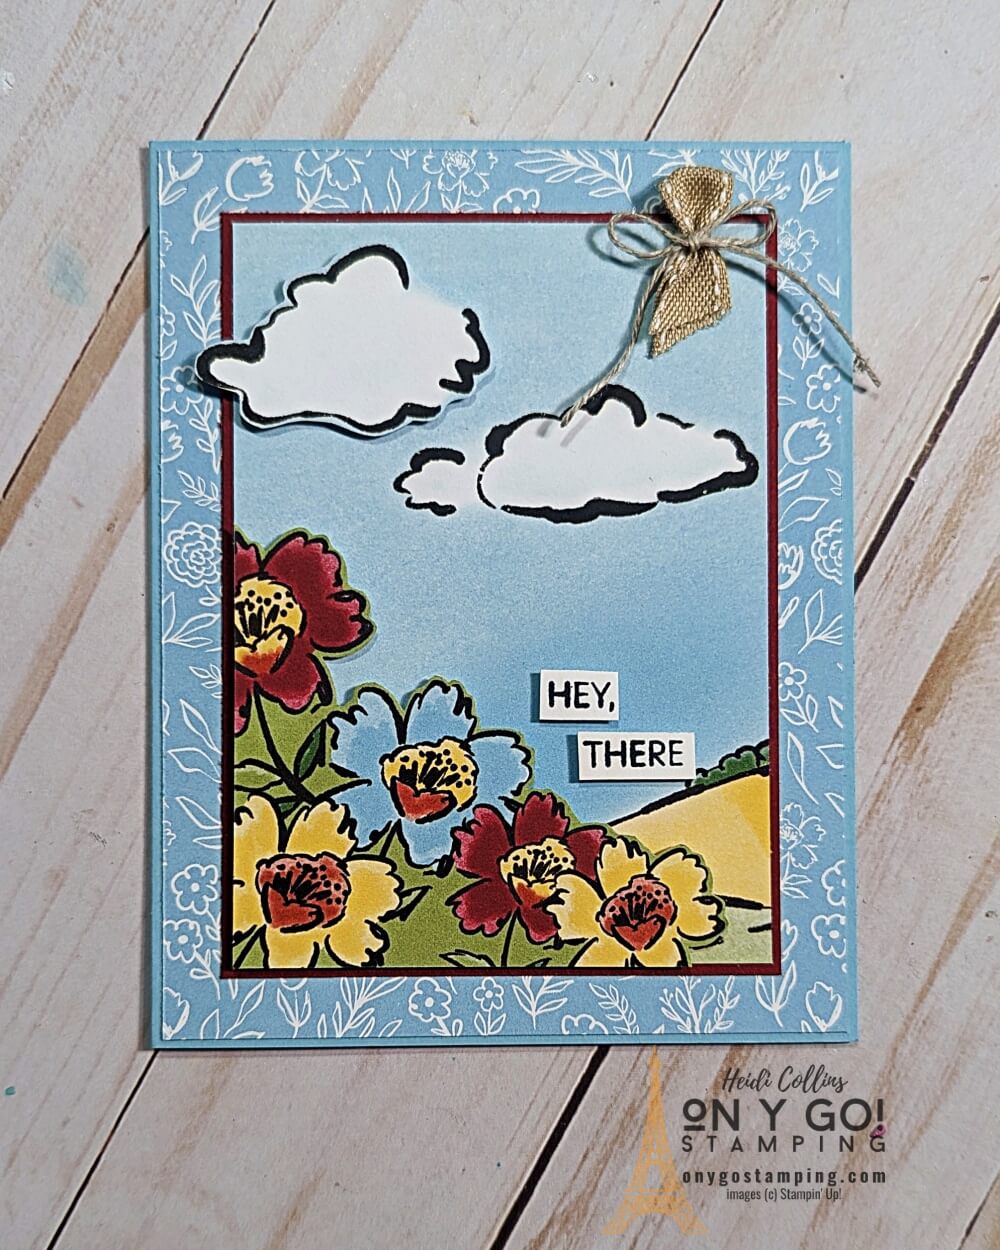 Handmade card using the Day at the Farm patterned paper. This paper will be available for FREE from Stampin' Up!® with a qualifying purchase during Sale-A-Bration 2023.